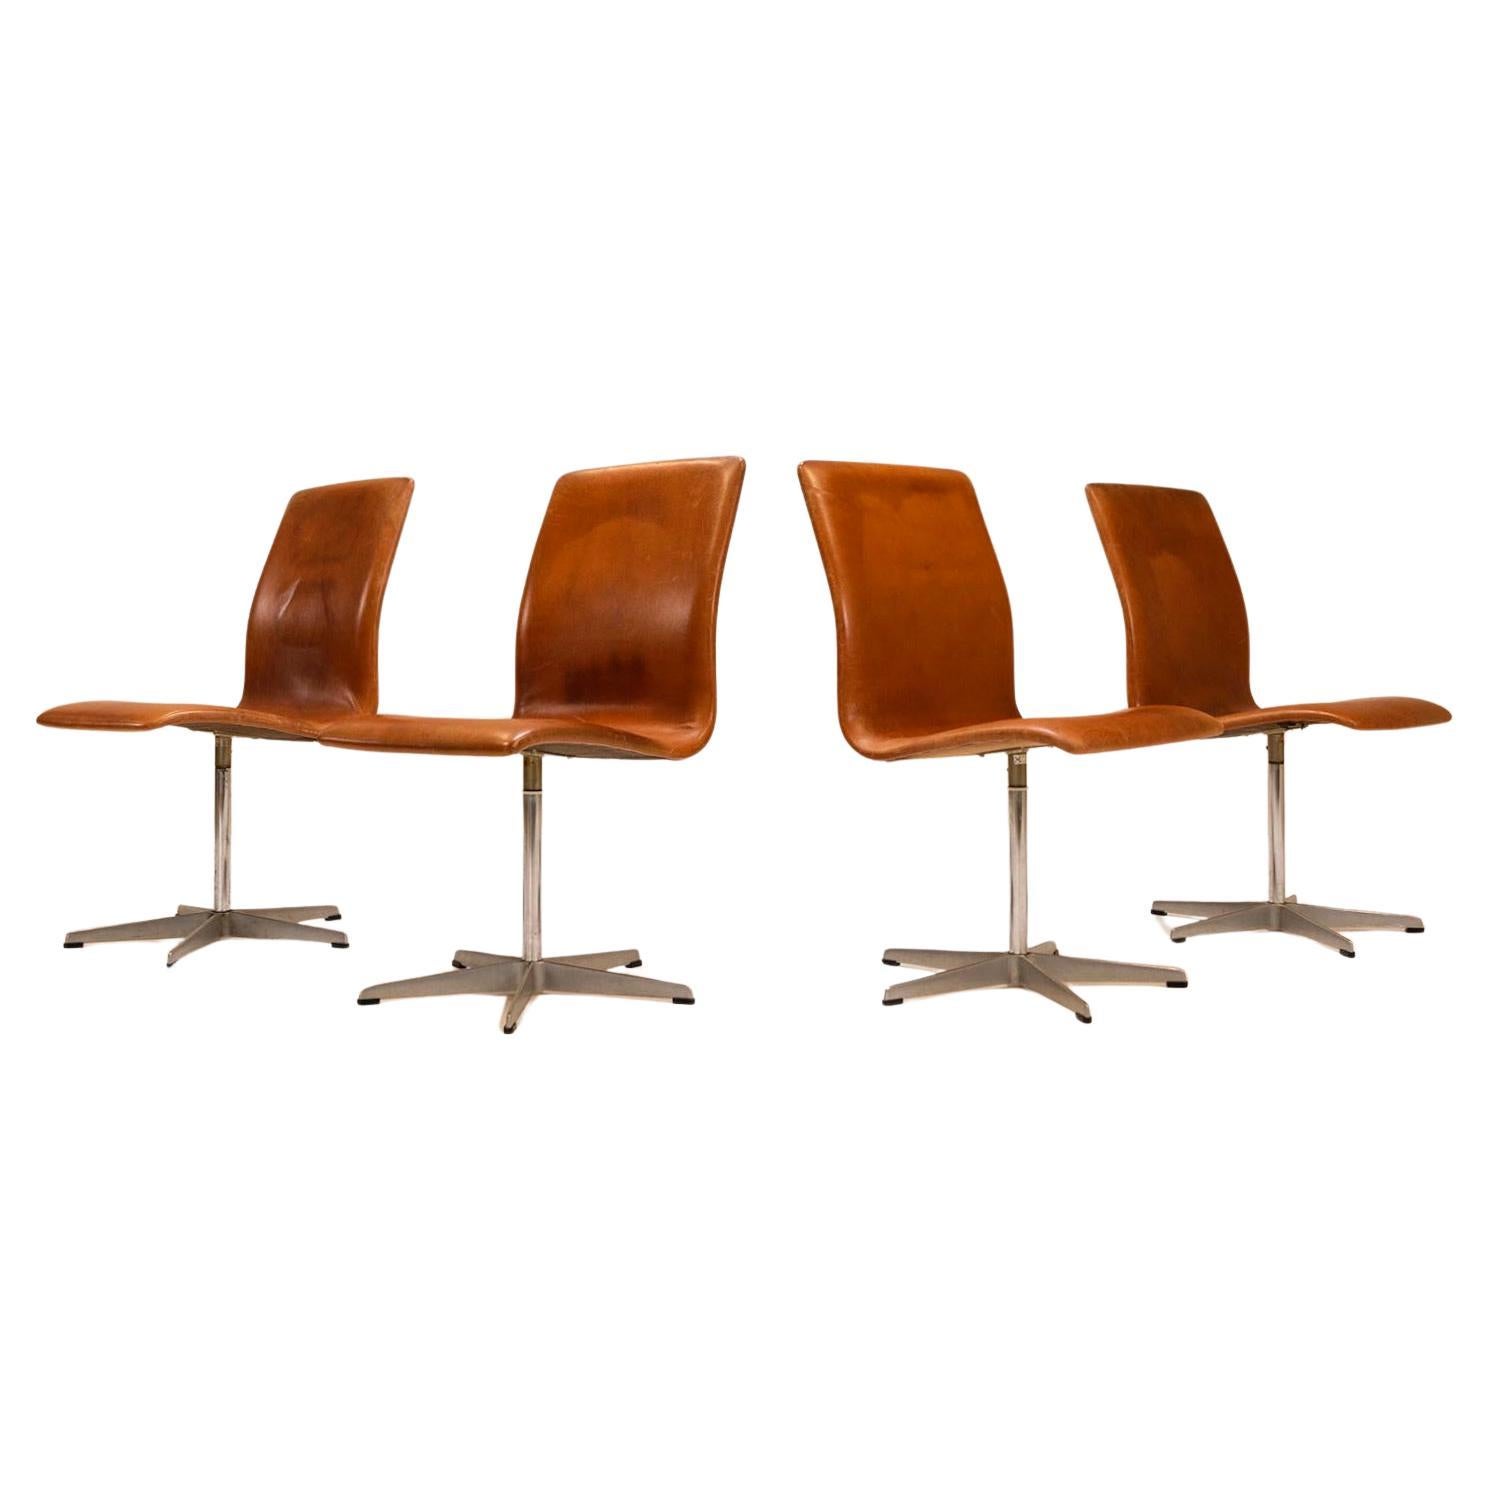 Set of Four Oxford Swivel Chairs in Brown Leather by Arne Jacobsen, design 1965 